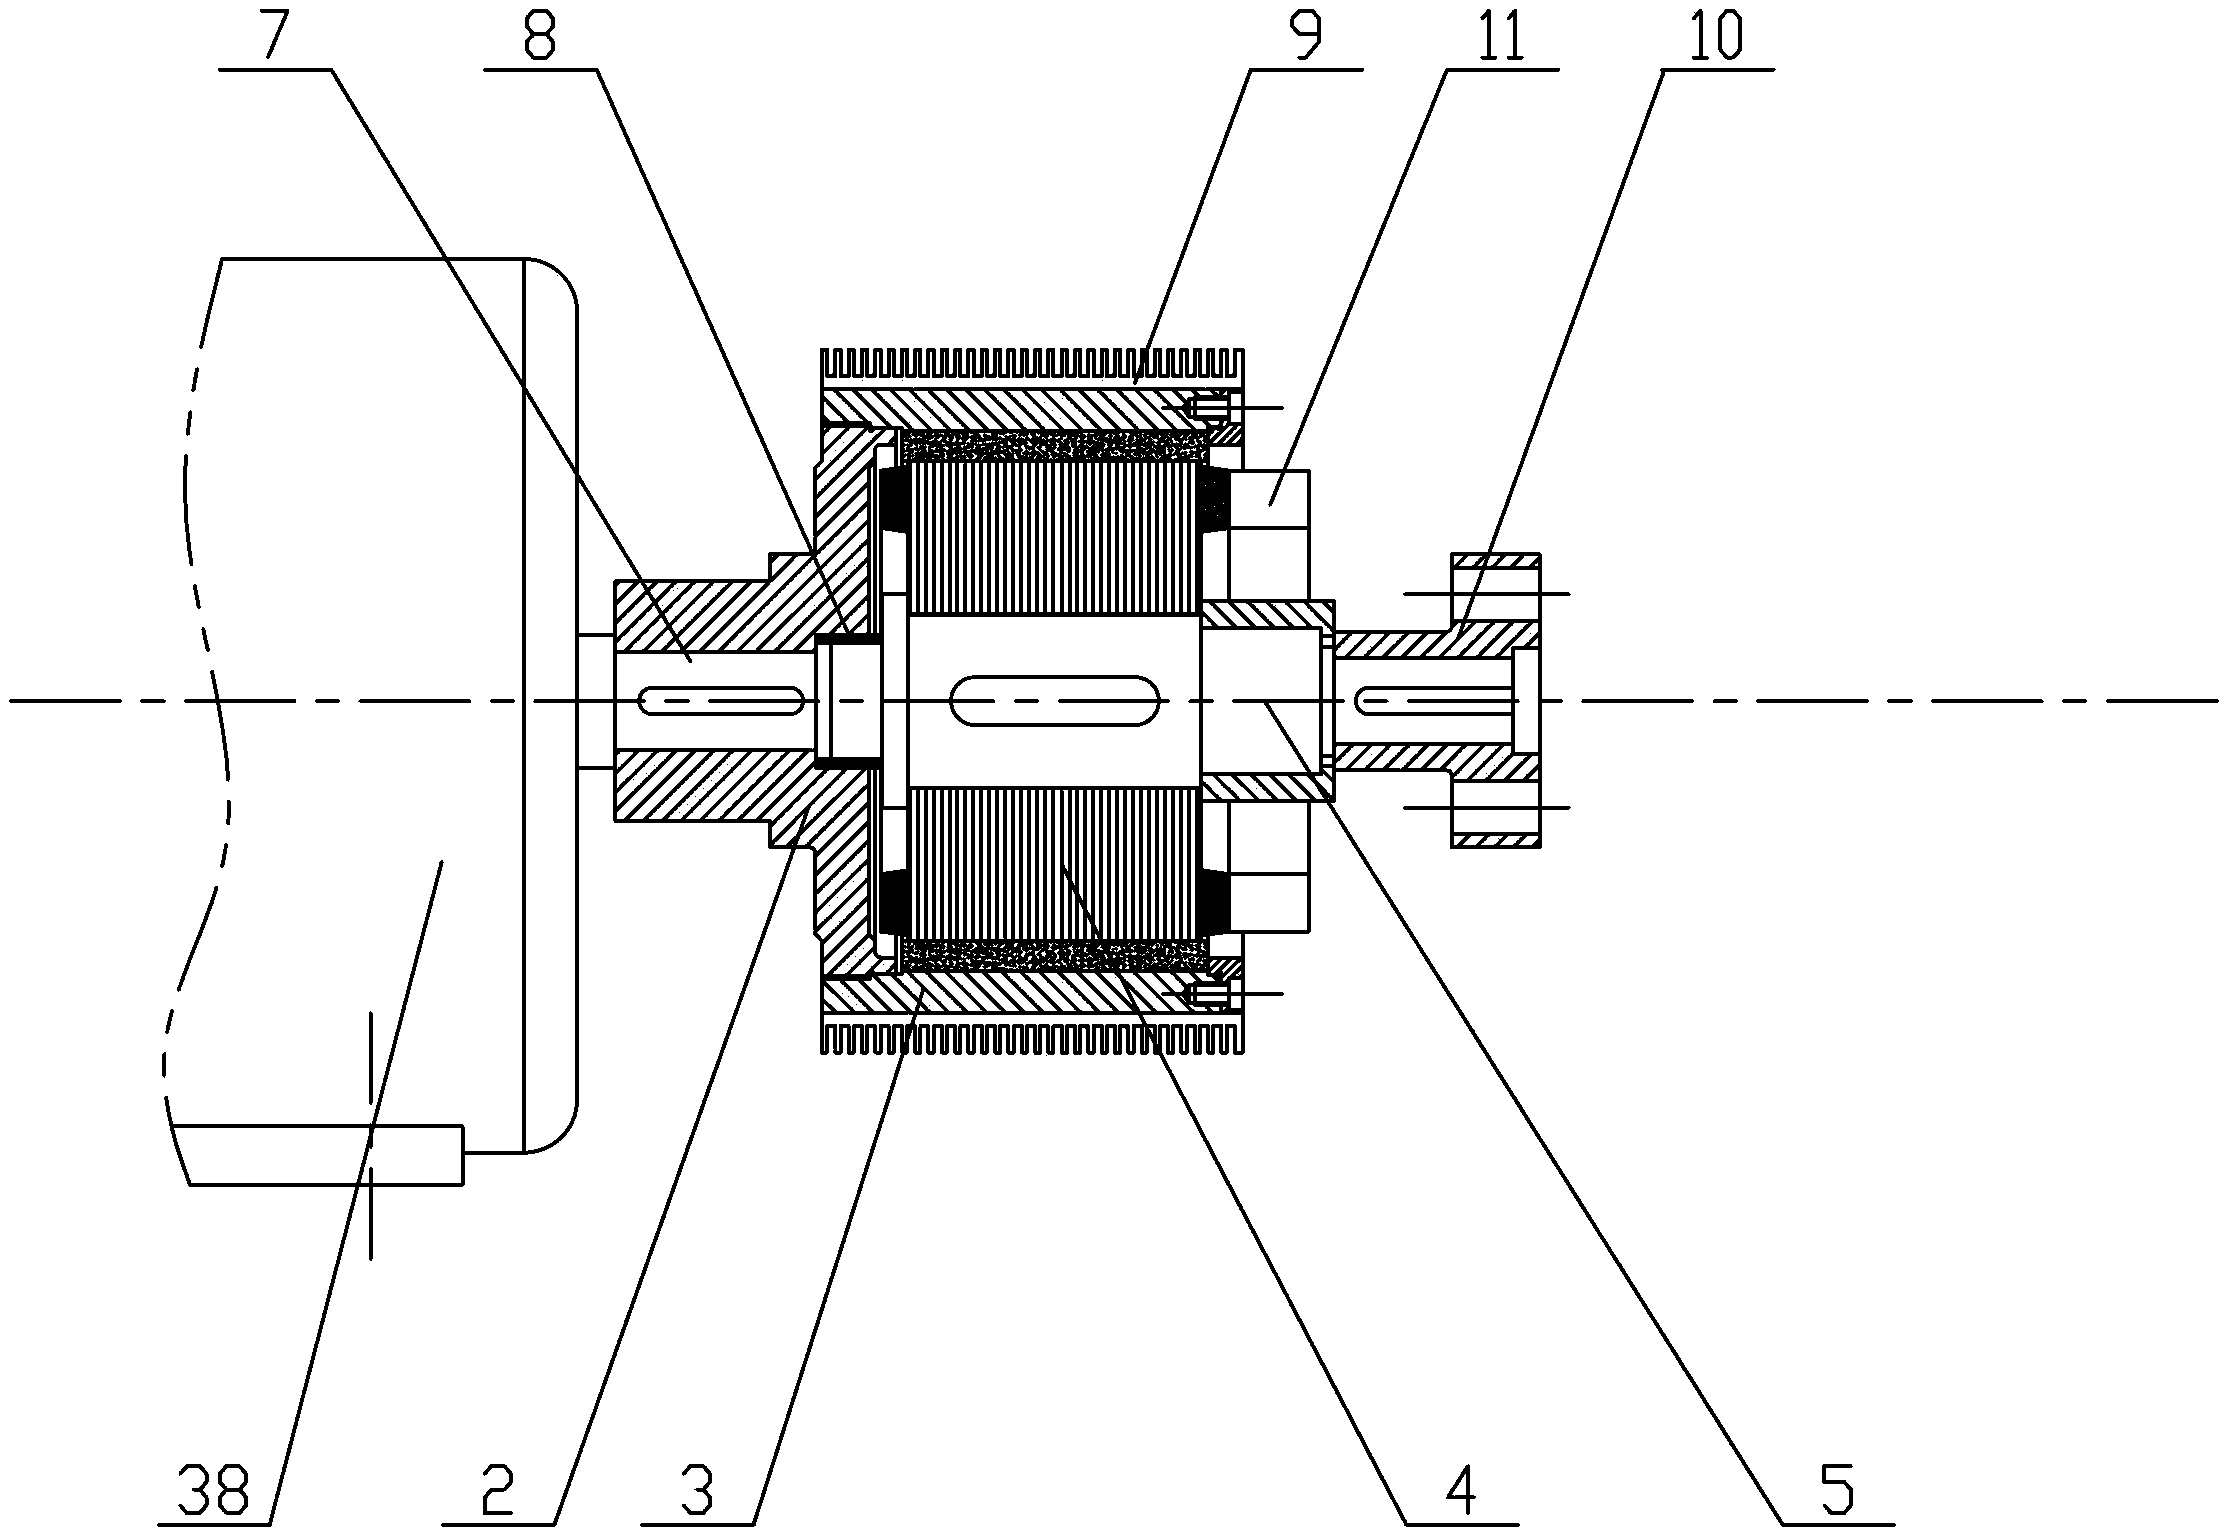 Magnetic coupler